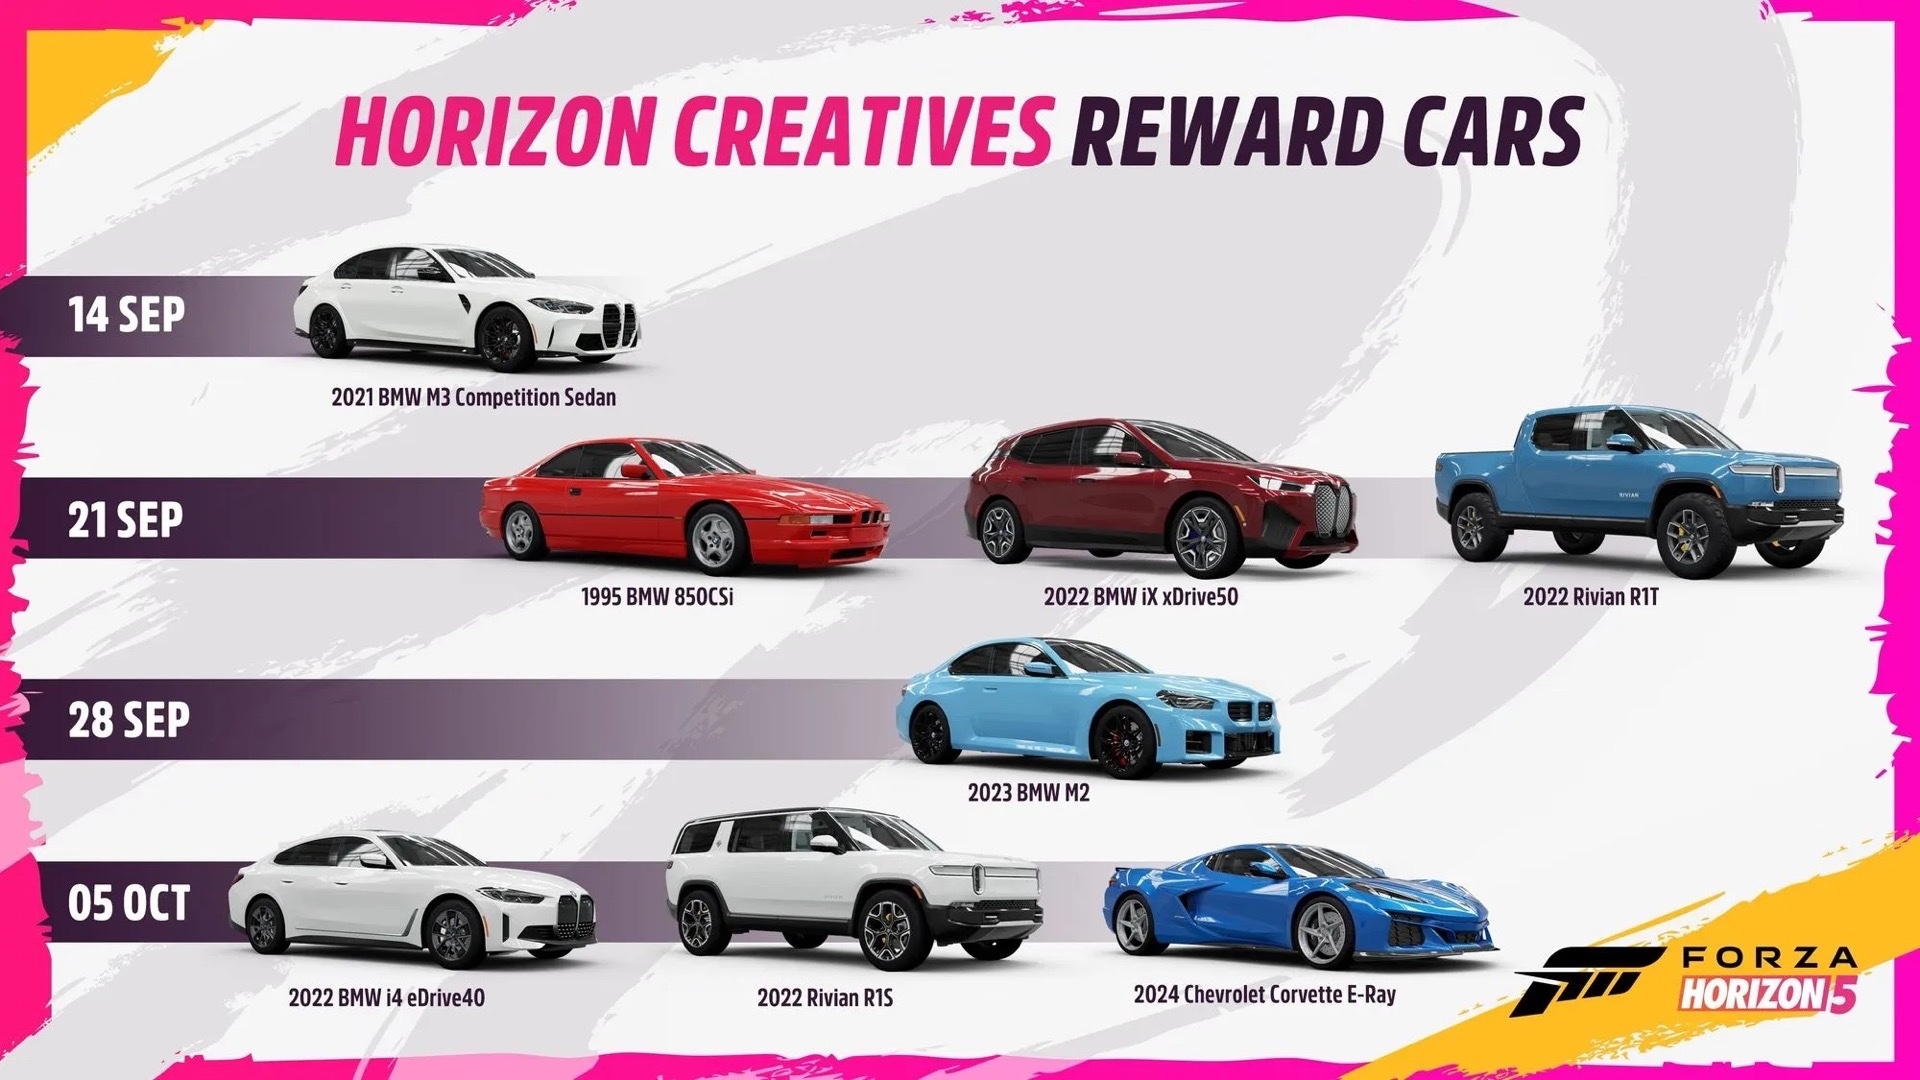 Forza Horizon 5's Latest Update Includes 5 New BMWs, 2 Rivians